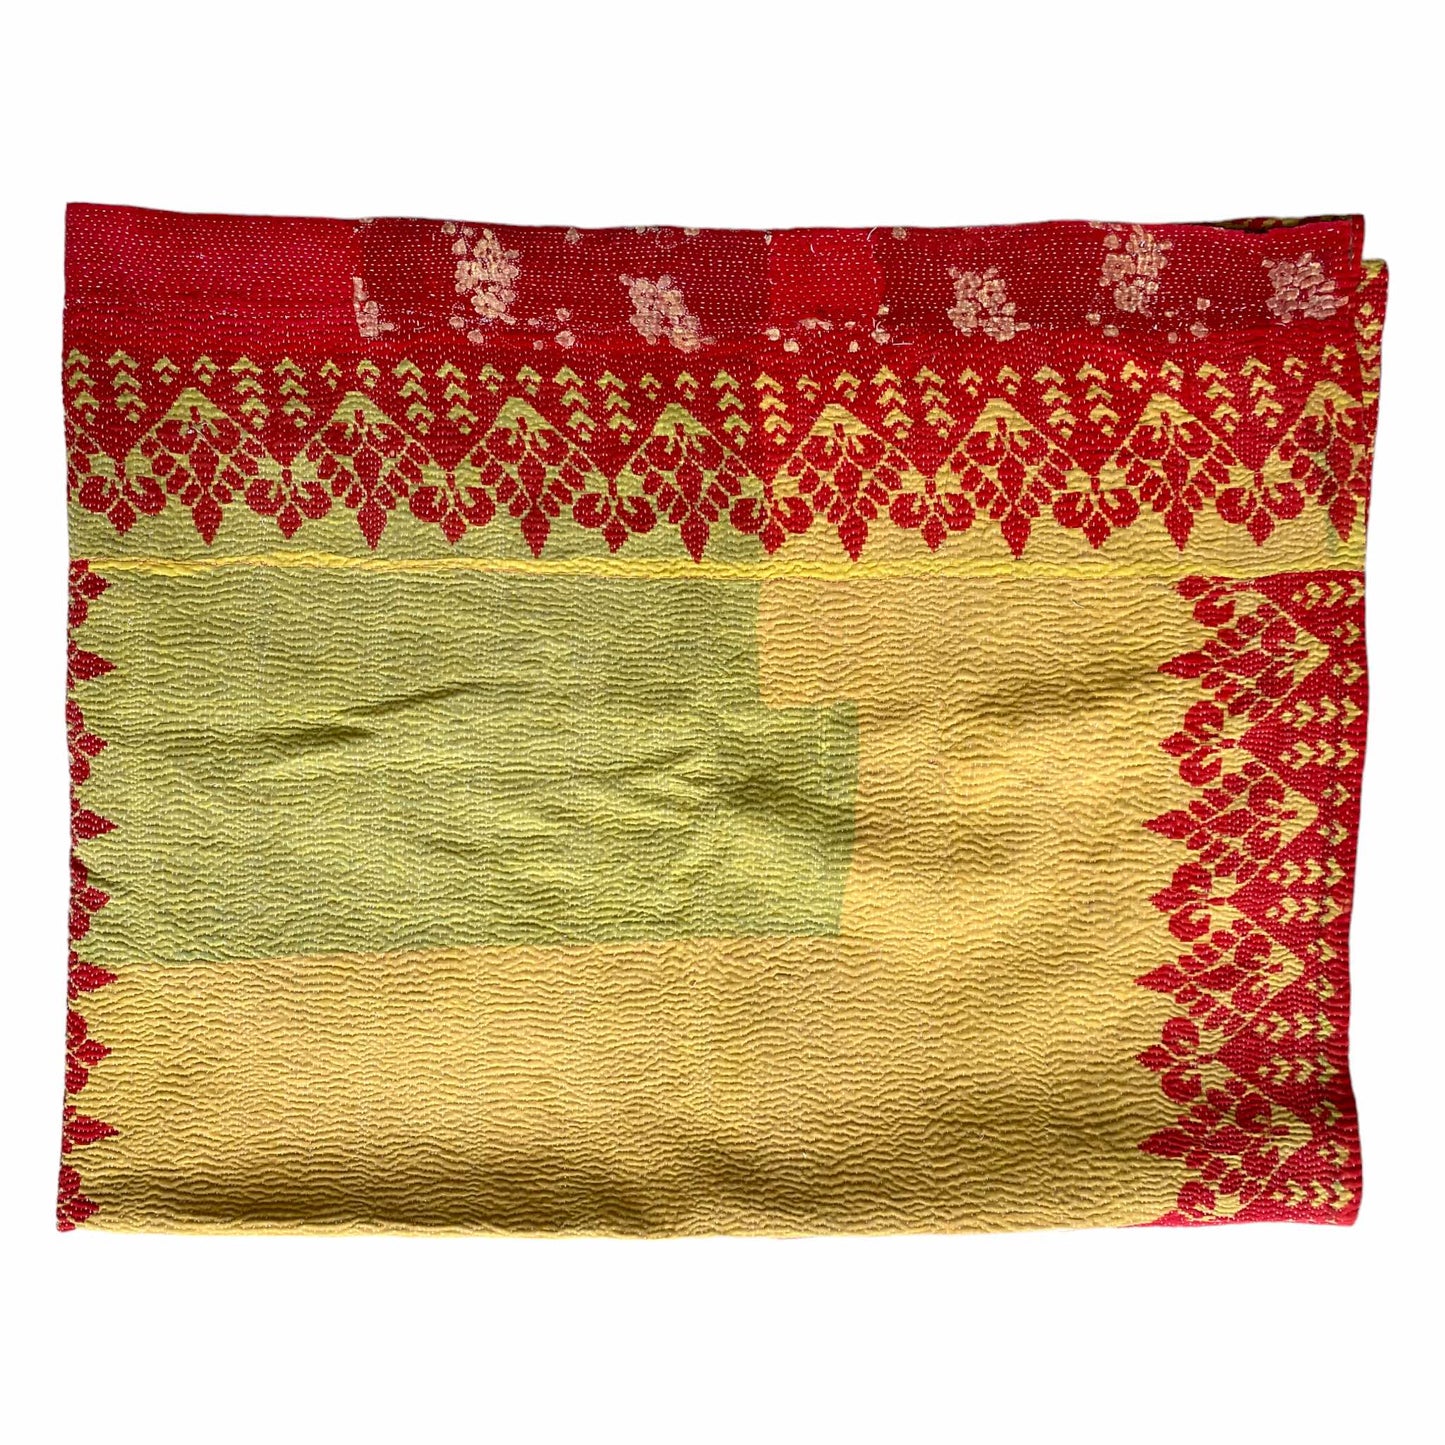 Red and yellow  vintage Kantha quilt